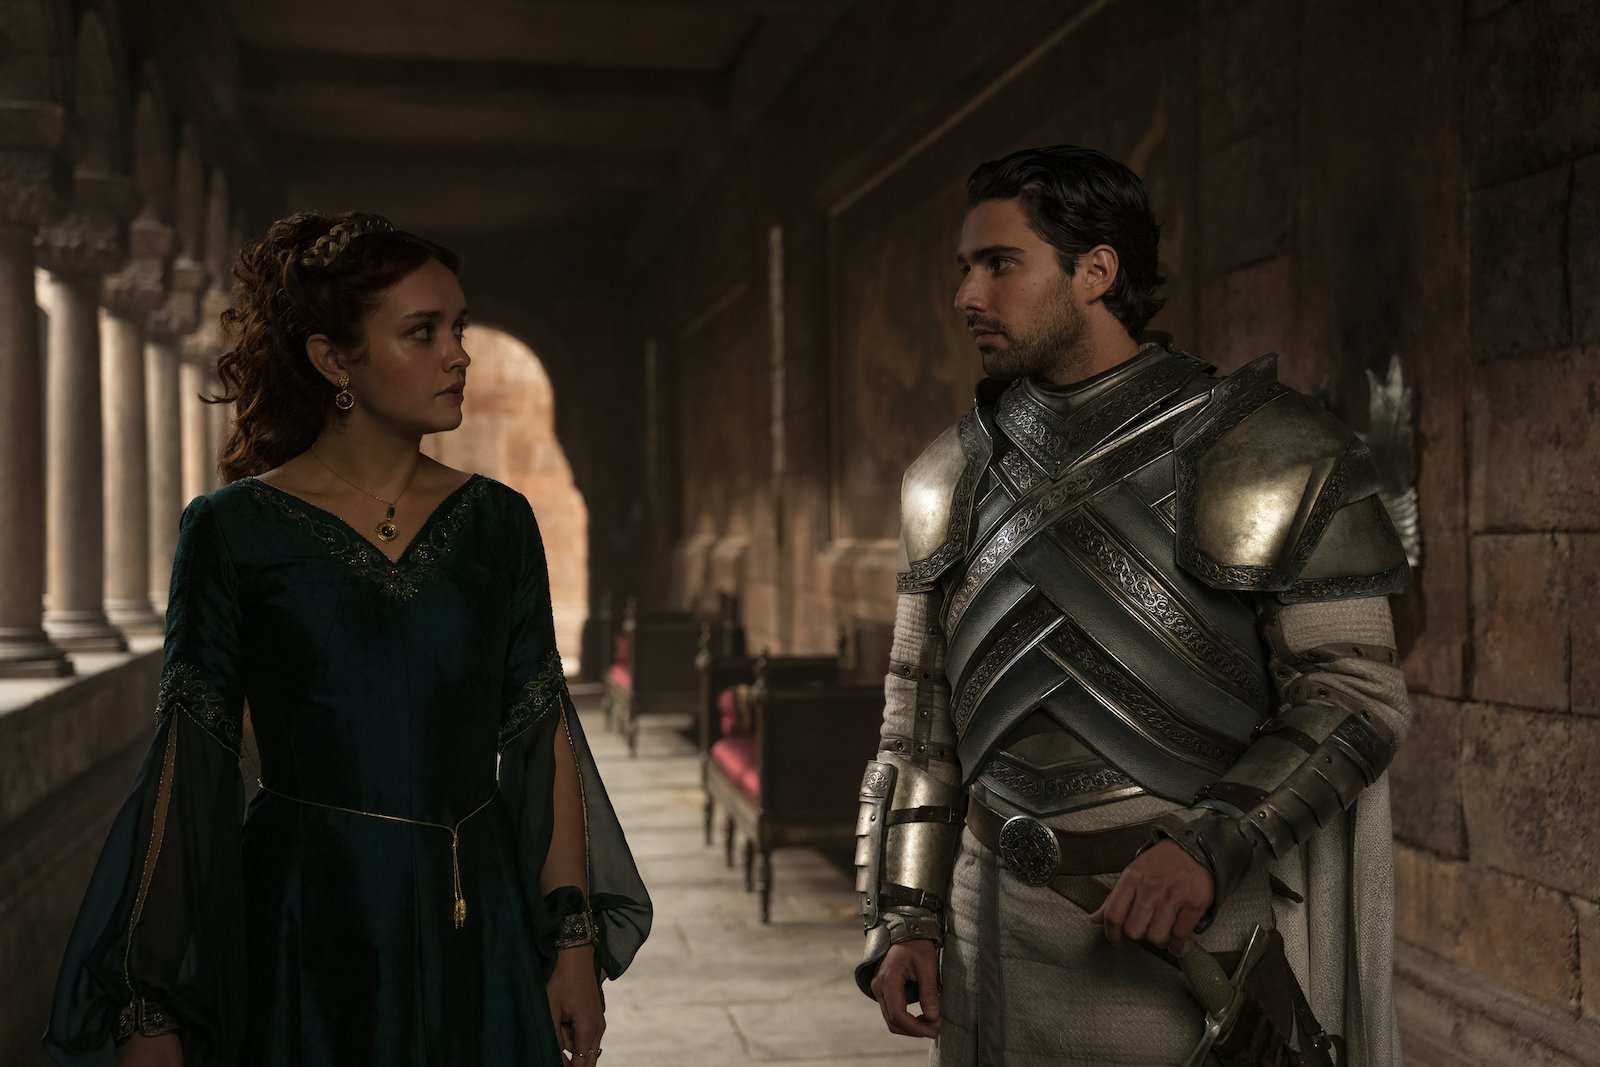 Olivia Cooke as Alicent Hightower and Fabien Frankel as Criston Cole in House of the Dragon